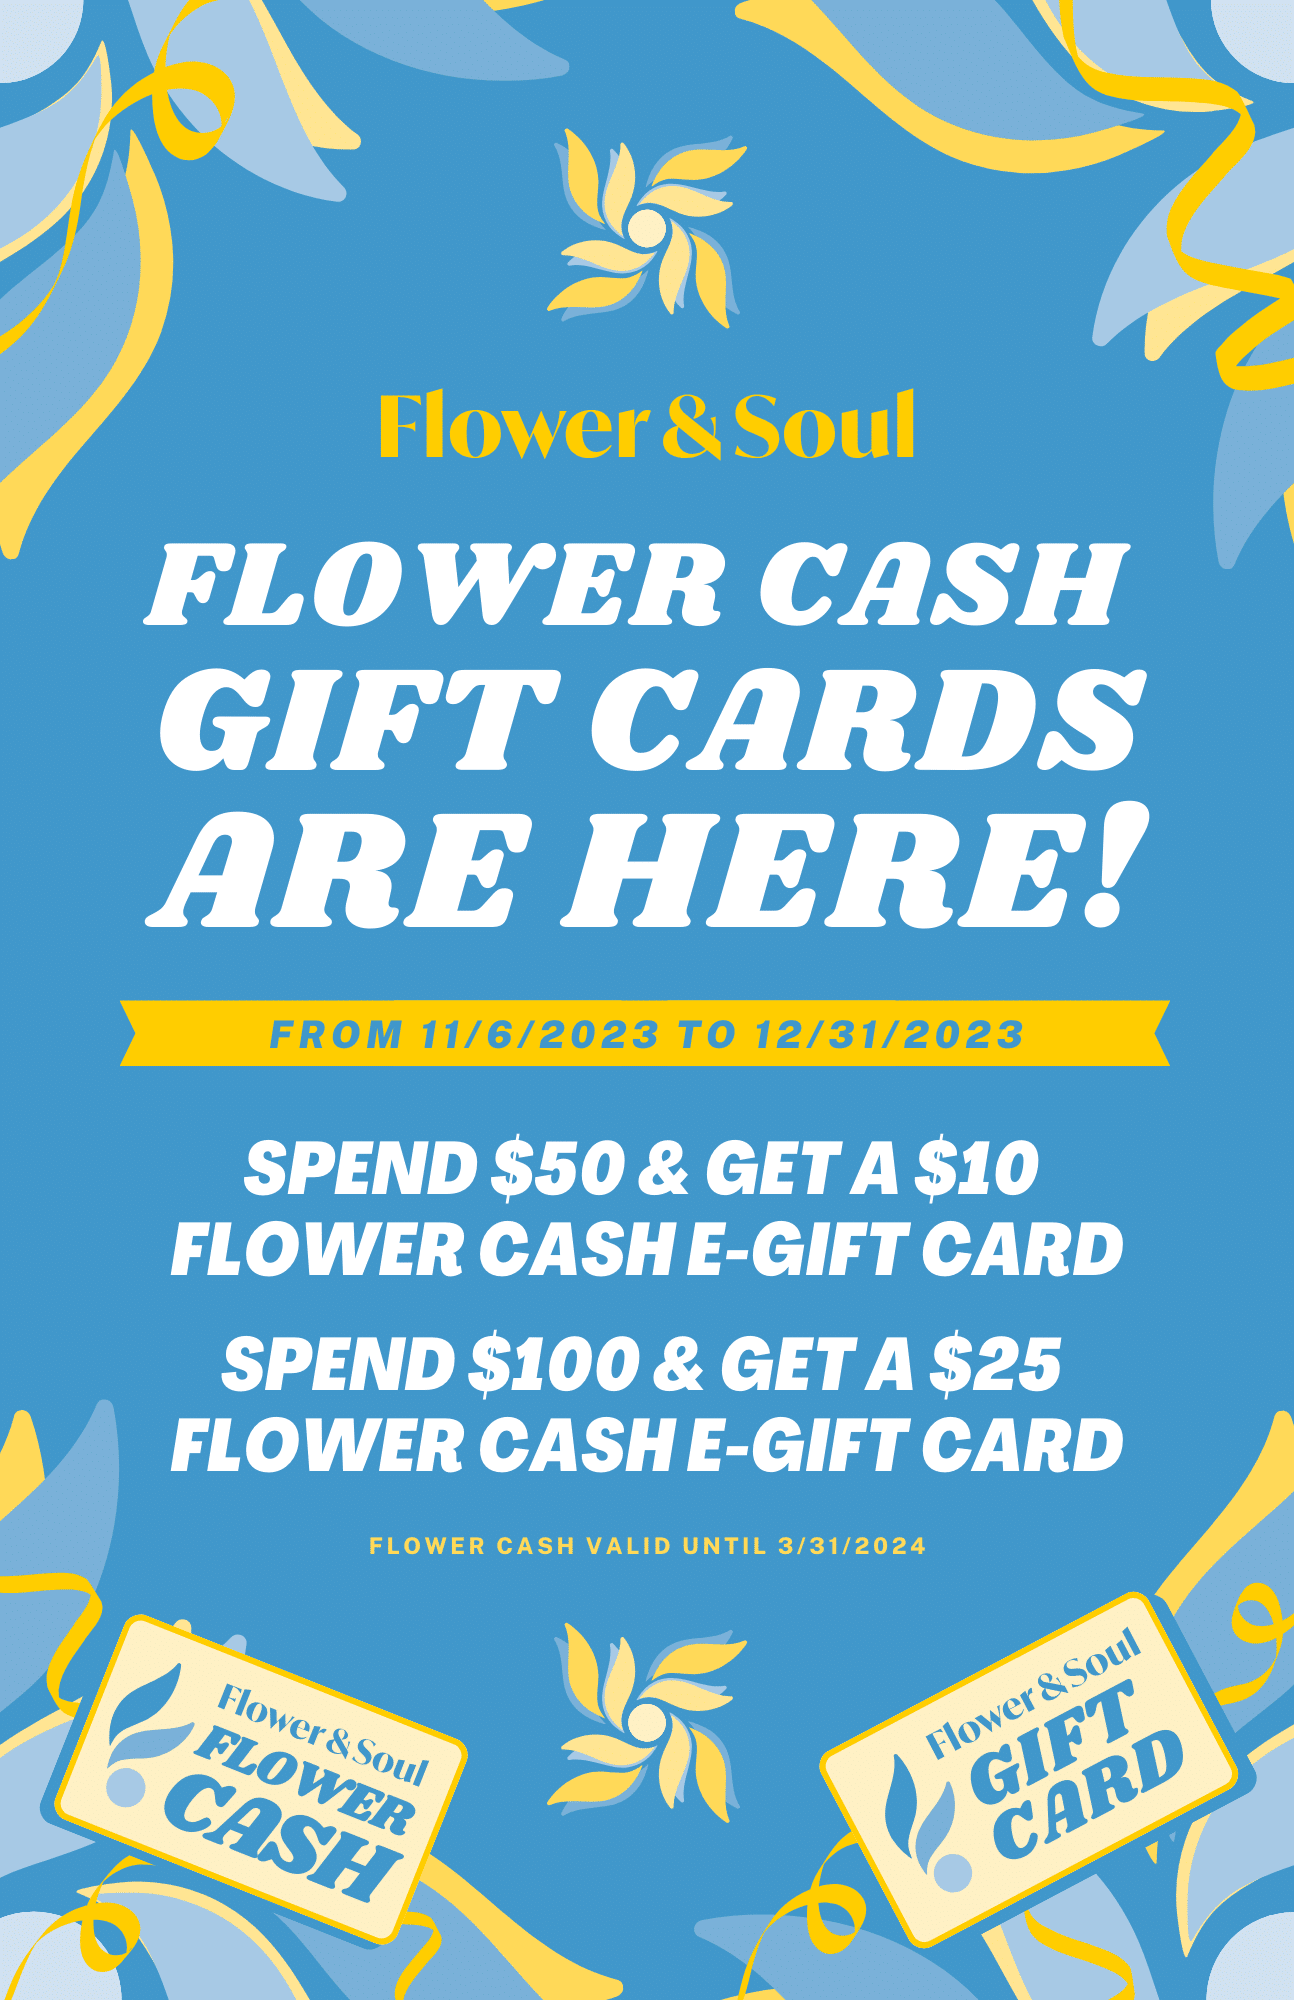 Flower Cash Gift Cards are here!